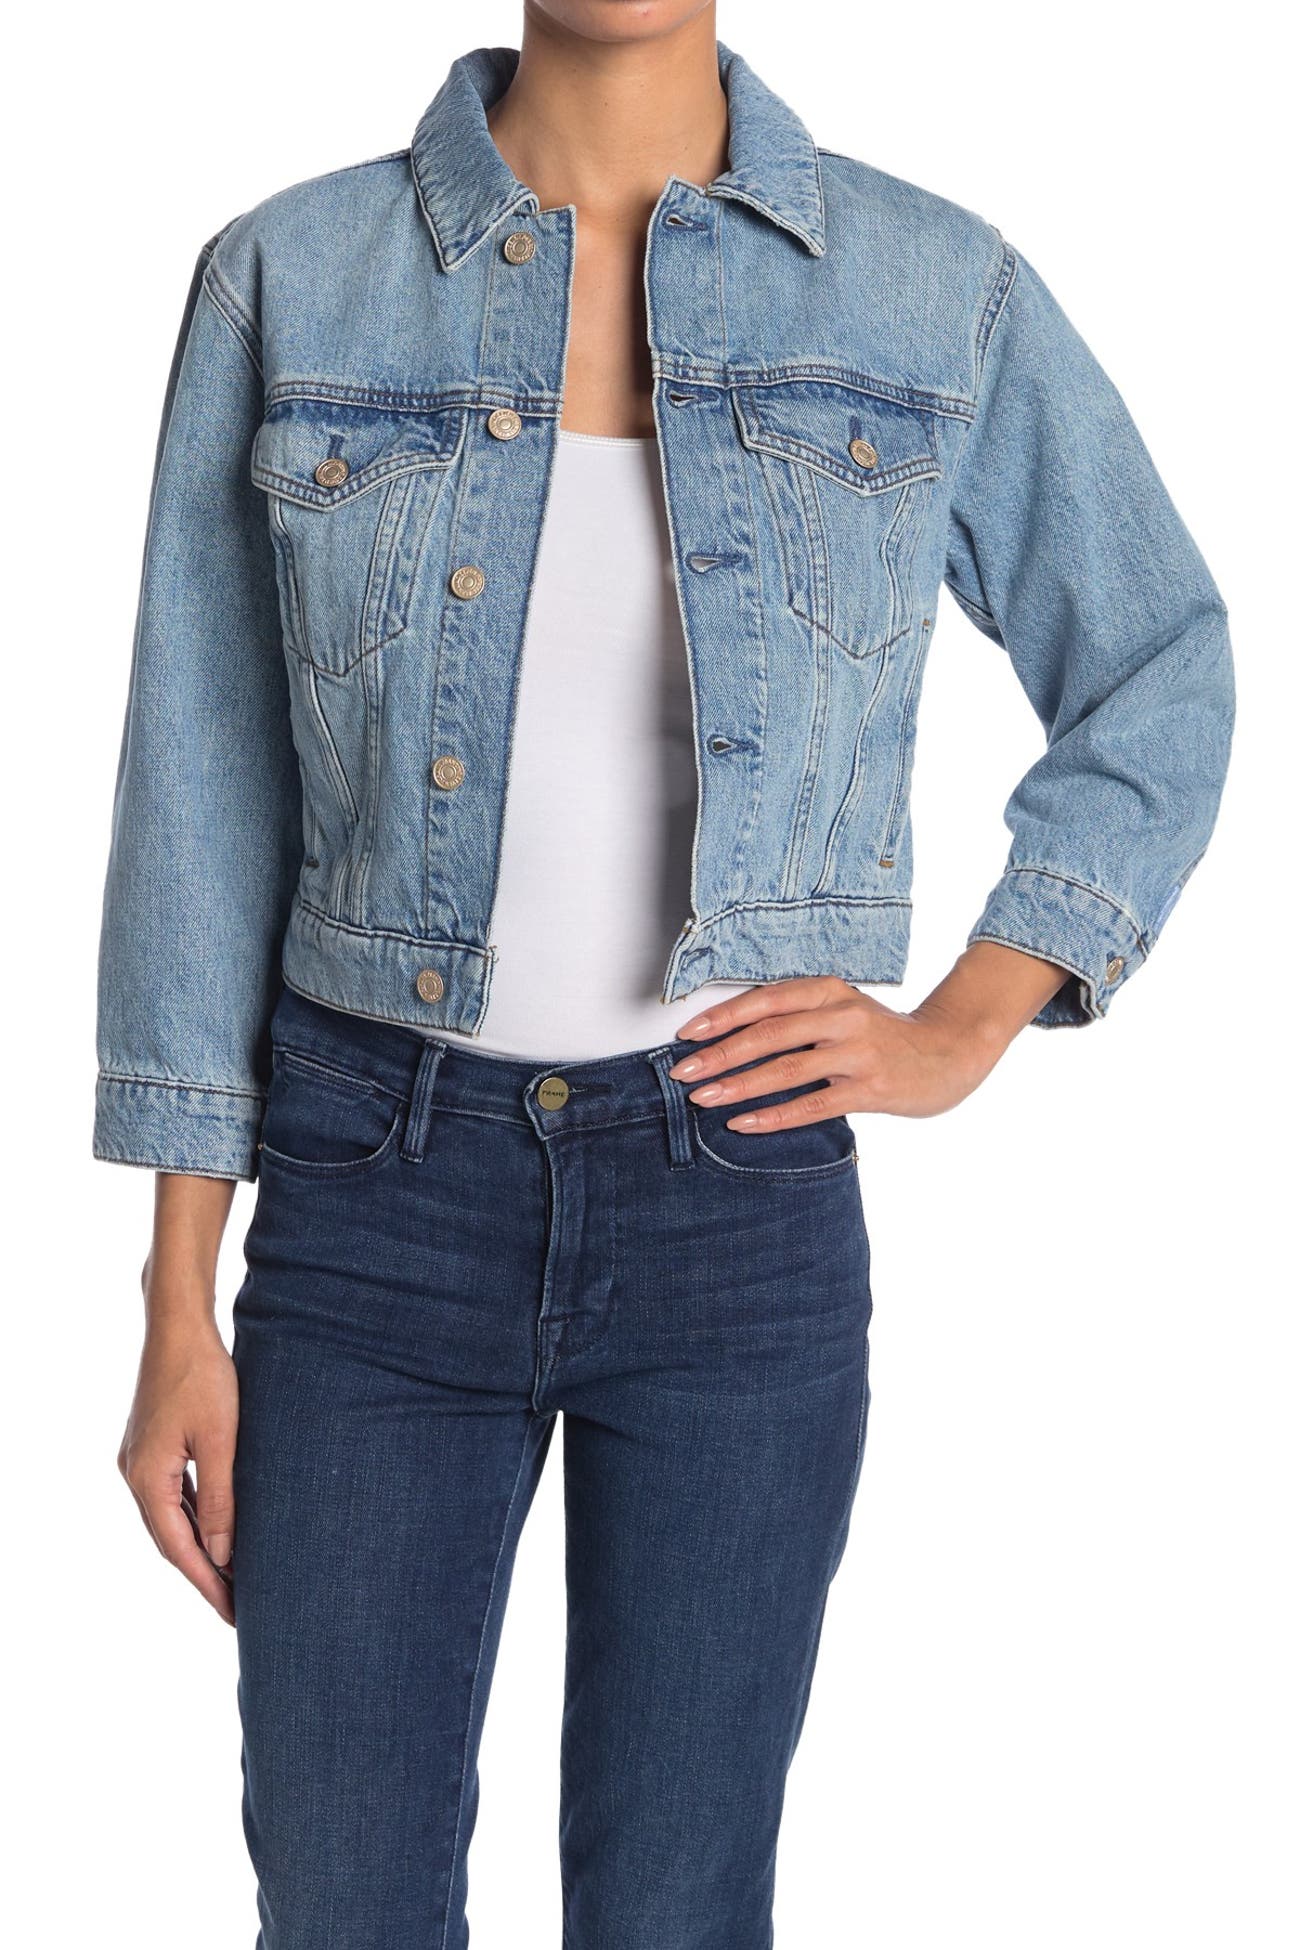 7 For All Mankind | Cropped Denim Jacket | HauteLook